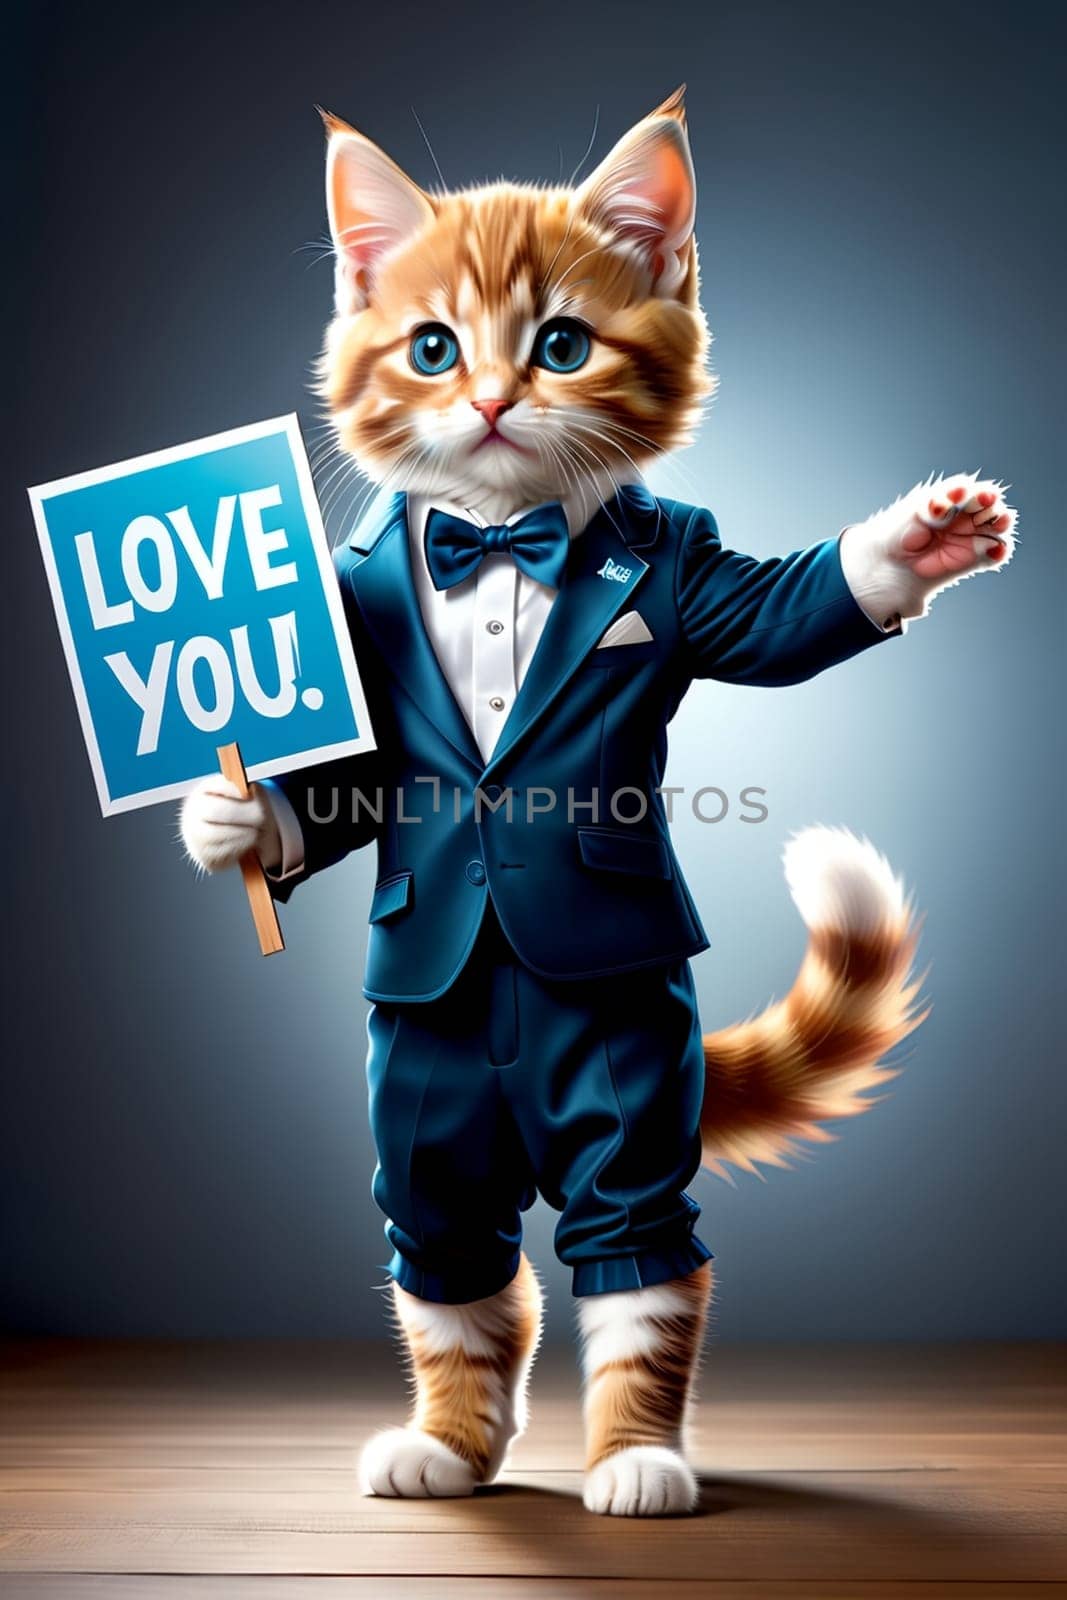 cute cat holding roses and a Love you sign by Rawlik